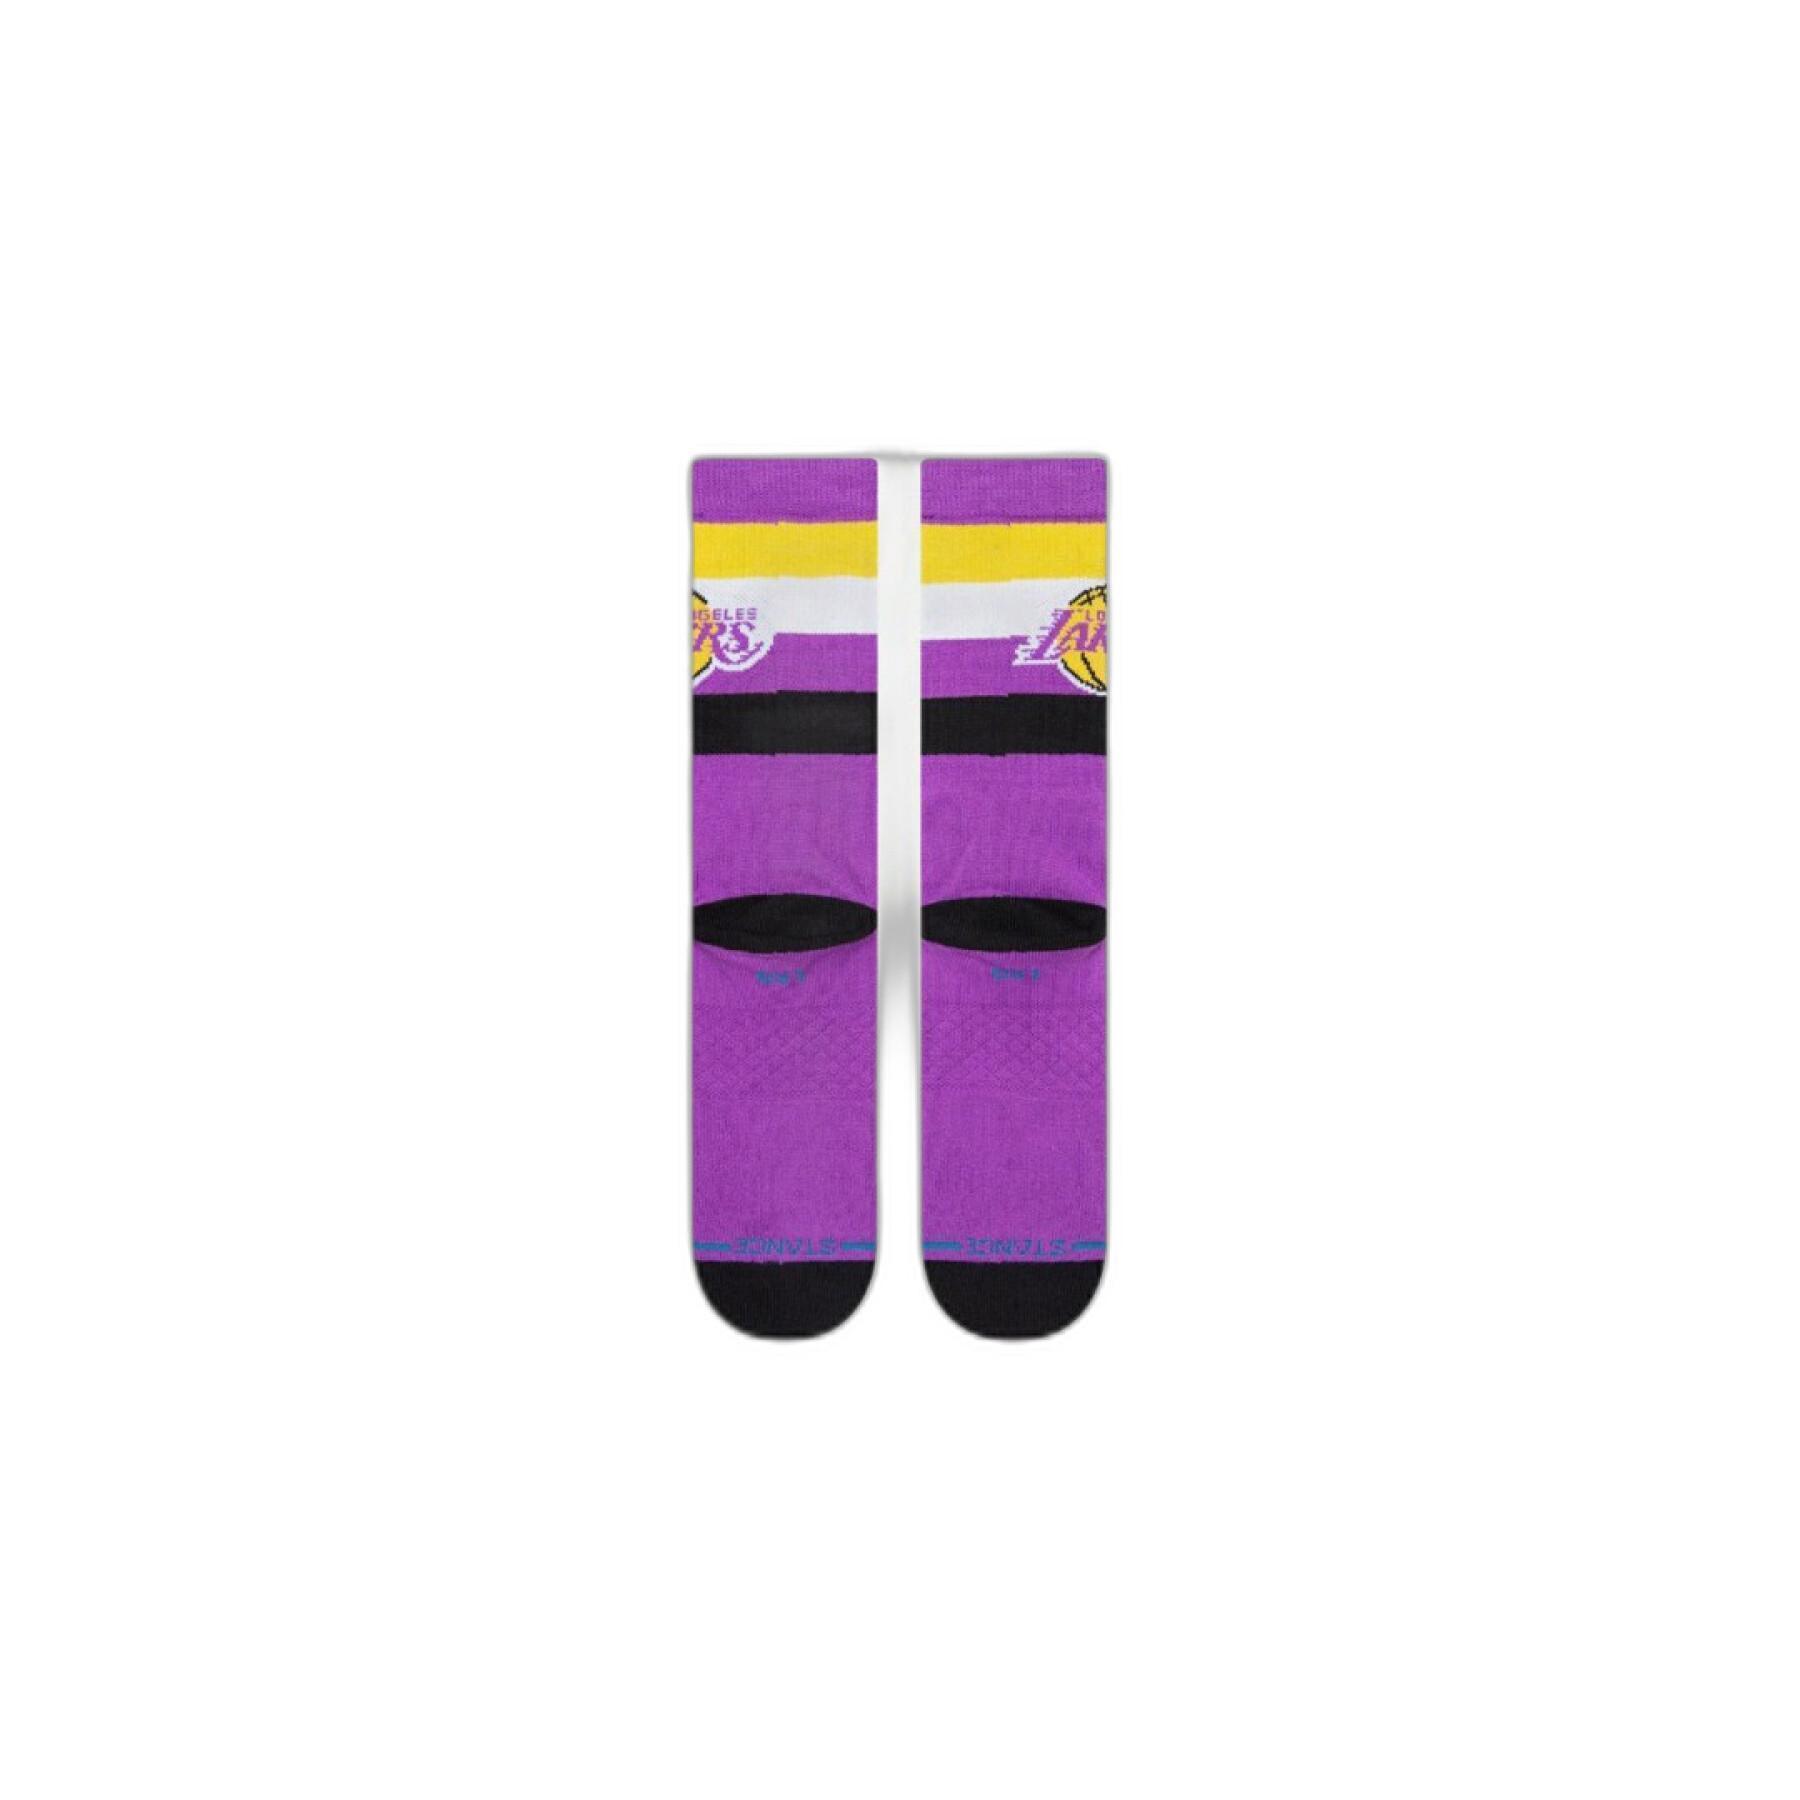 Chaussettes Los Angeles Lakers St Crew